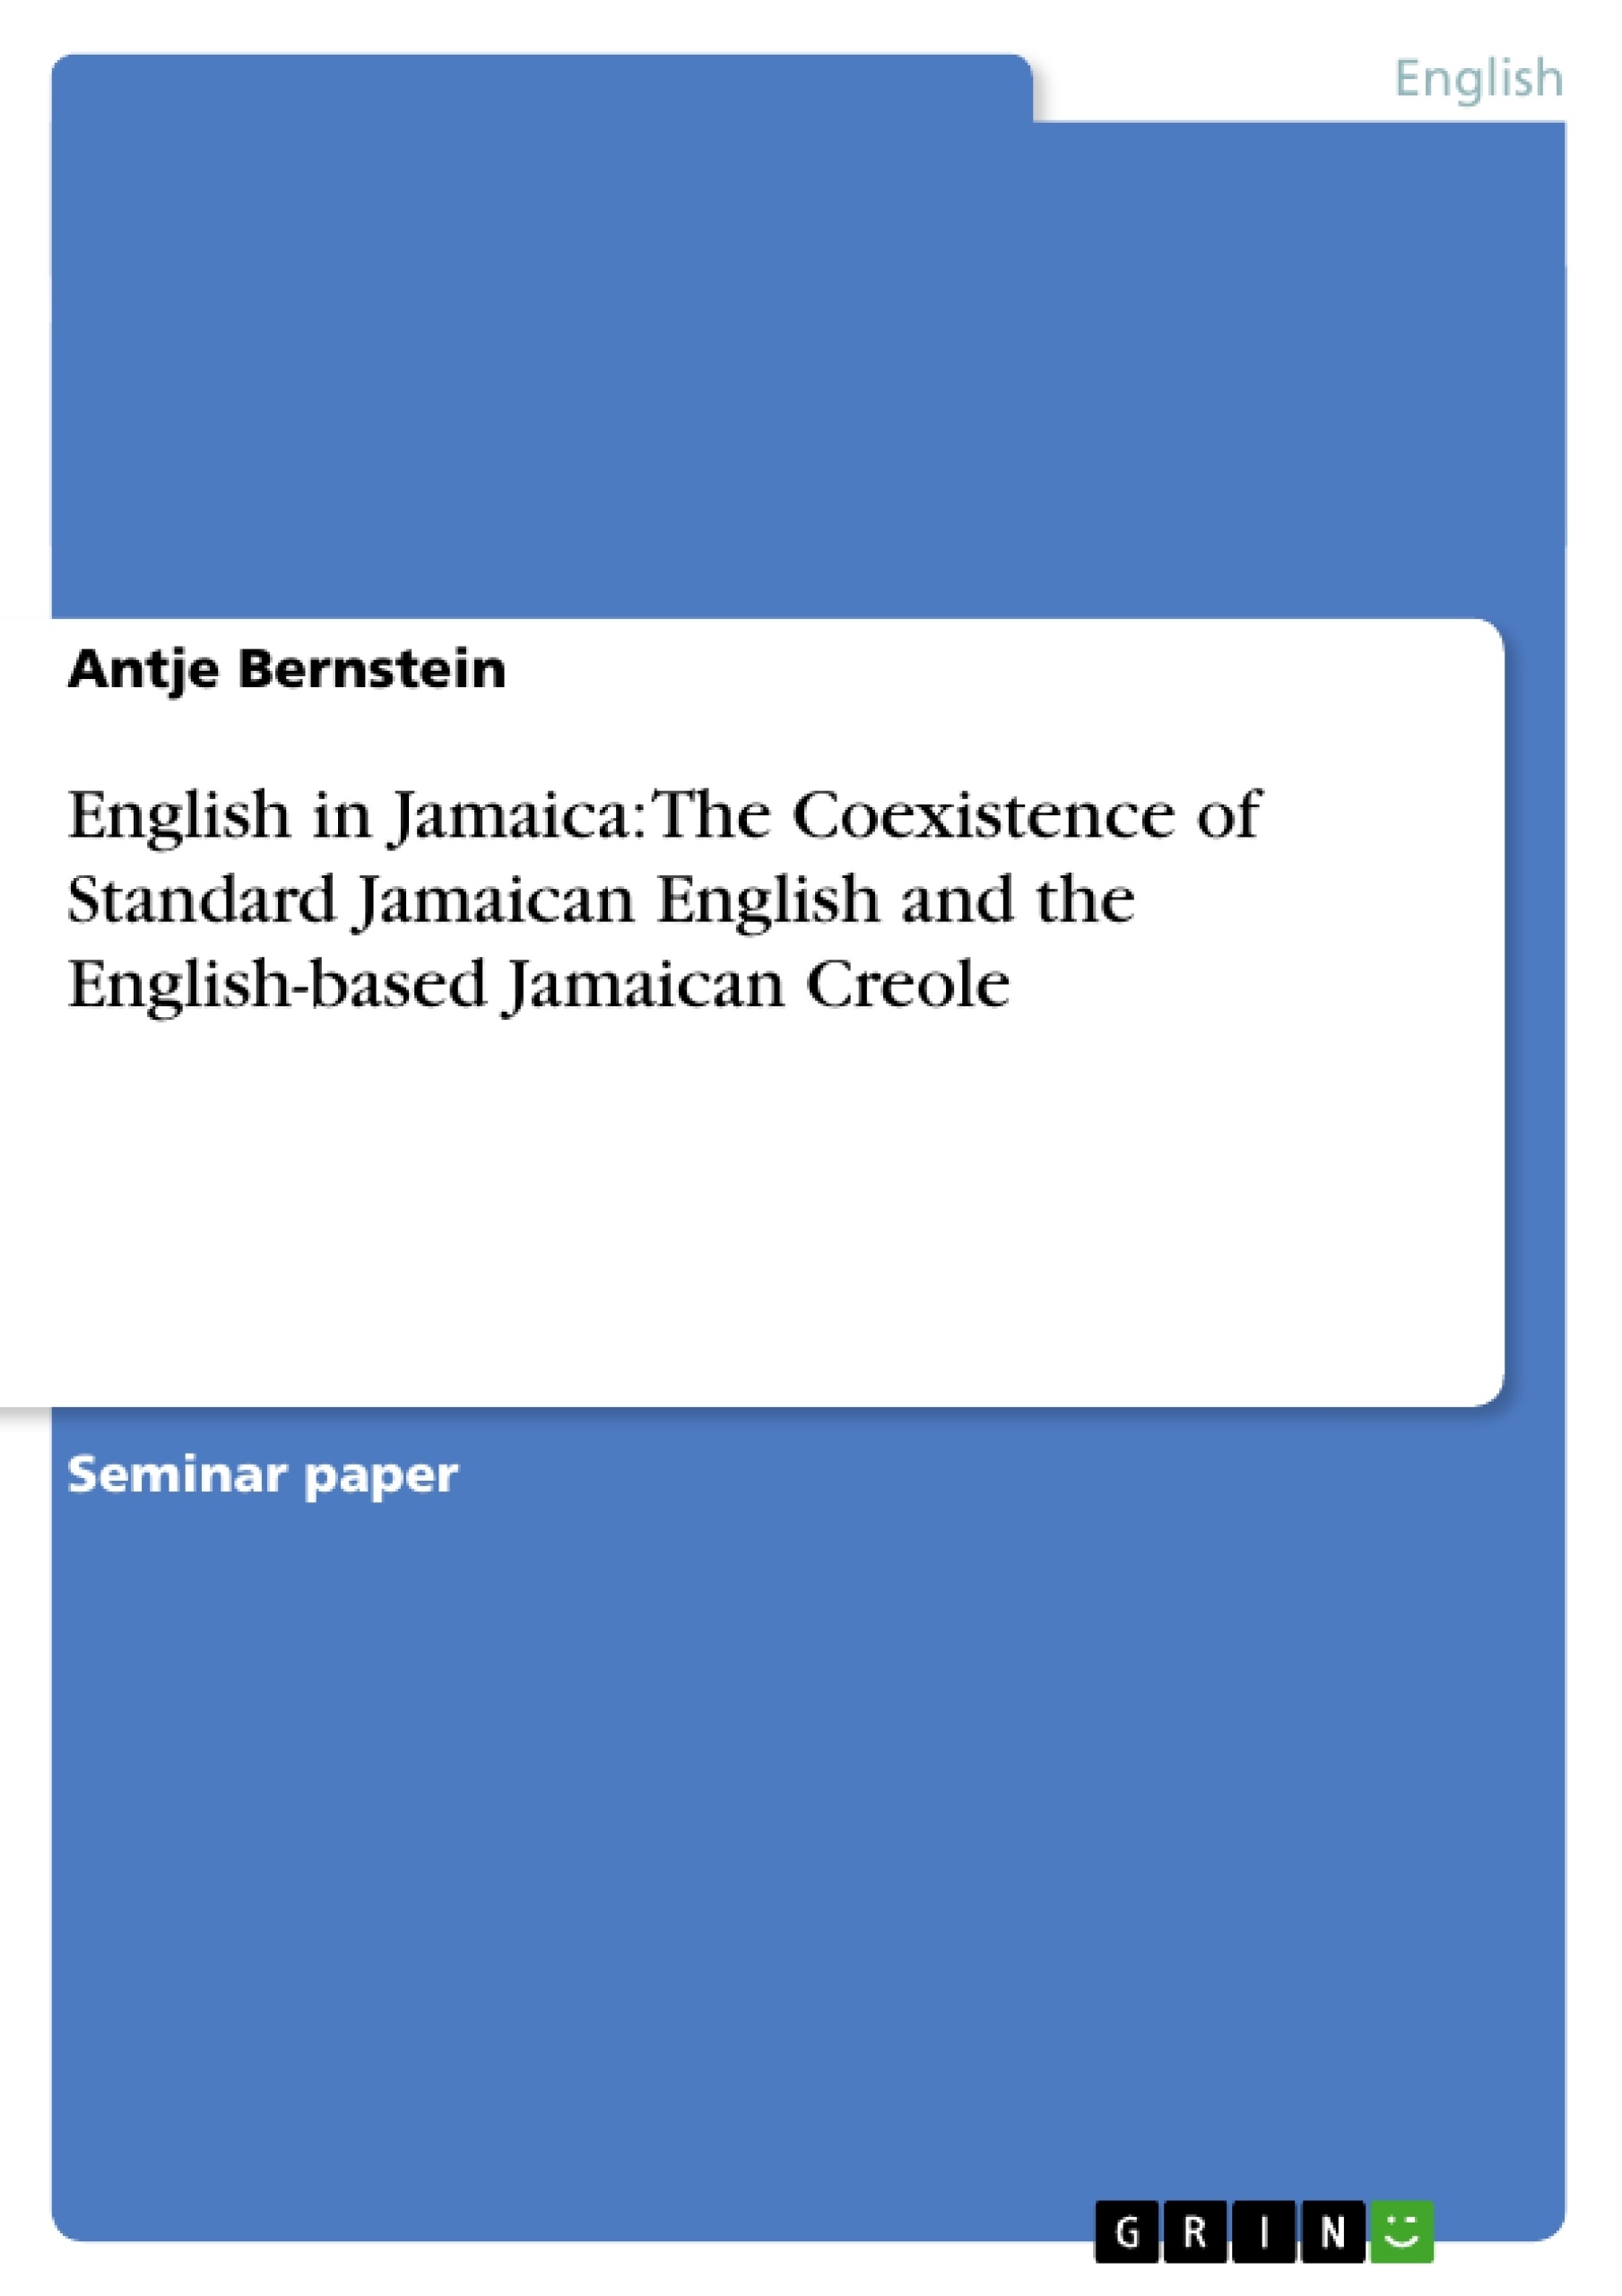 Title: English in Jamaica: The Coexistence of Standard Jamaican English and the English-based Jamaican Creole